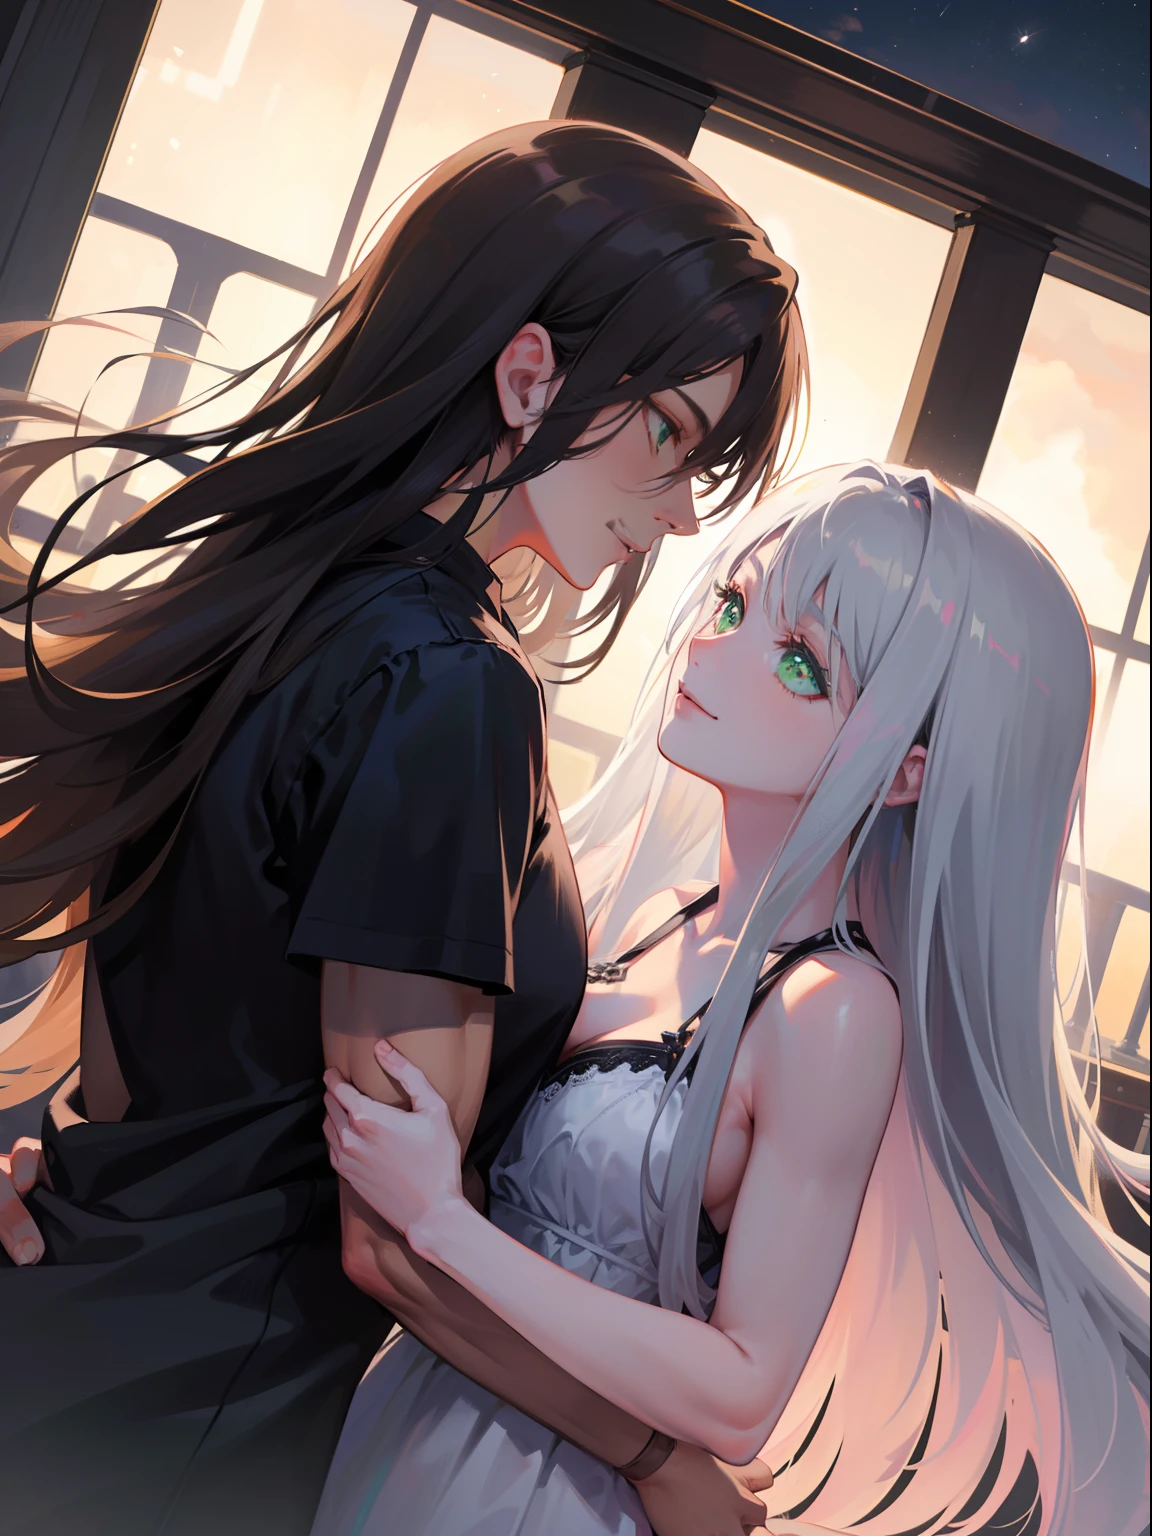 (masterpiece), best quality, ultra high res, sharp focus, ((1 man, 1 woman, couple)), different heights, upper body, medium close up, dutch angle, embraces each other closely, (at the beautiful night time:1.2), in the romantic balcony, look at each other, smiles to each other

Sephiroth, male, tall, silver white hair, long hair, (perfect muscular body, perfect masculine face:1.2), ((perfect shape eyes, green cat eyes))

female, short, chestnut brown hair, short hair, (perfect feminine face, perfect hourglass body:1.2), ((perfect shape eyes, green eyes))